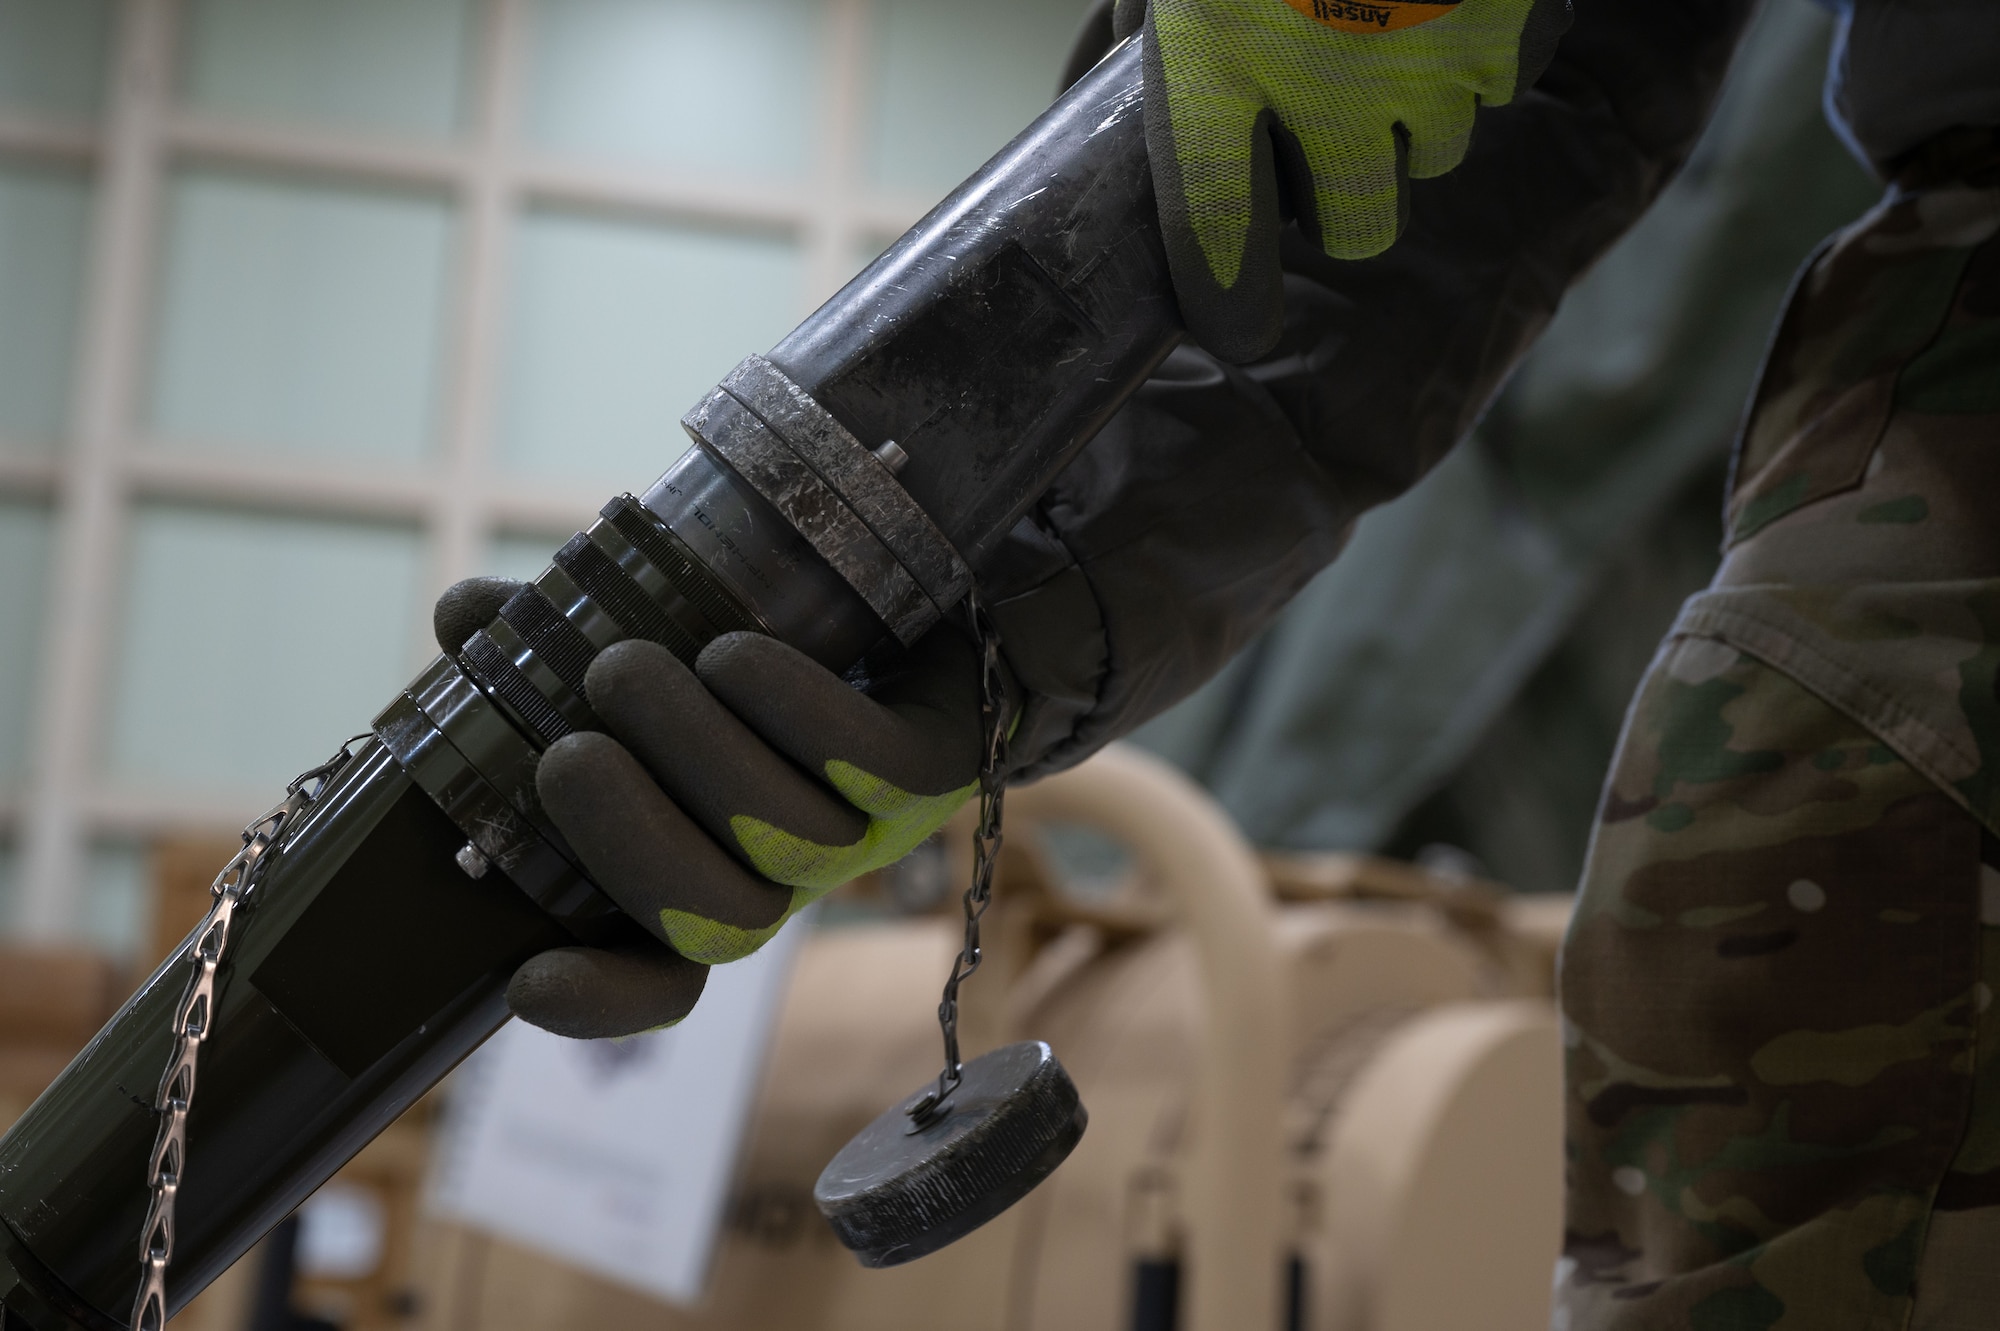 An Airman connects the generator power distribution plug to an environmental control unit plug at Kunsan Air Base, Republic of Korea, Jan. 20, 2023. This connection powers the fan filter assembly, which expands the chemical protection facility. (U.S. Air Force photo by Senior Airman Akeem K. Campbell)